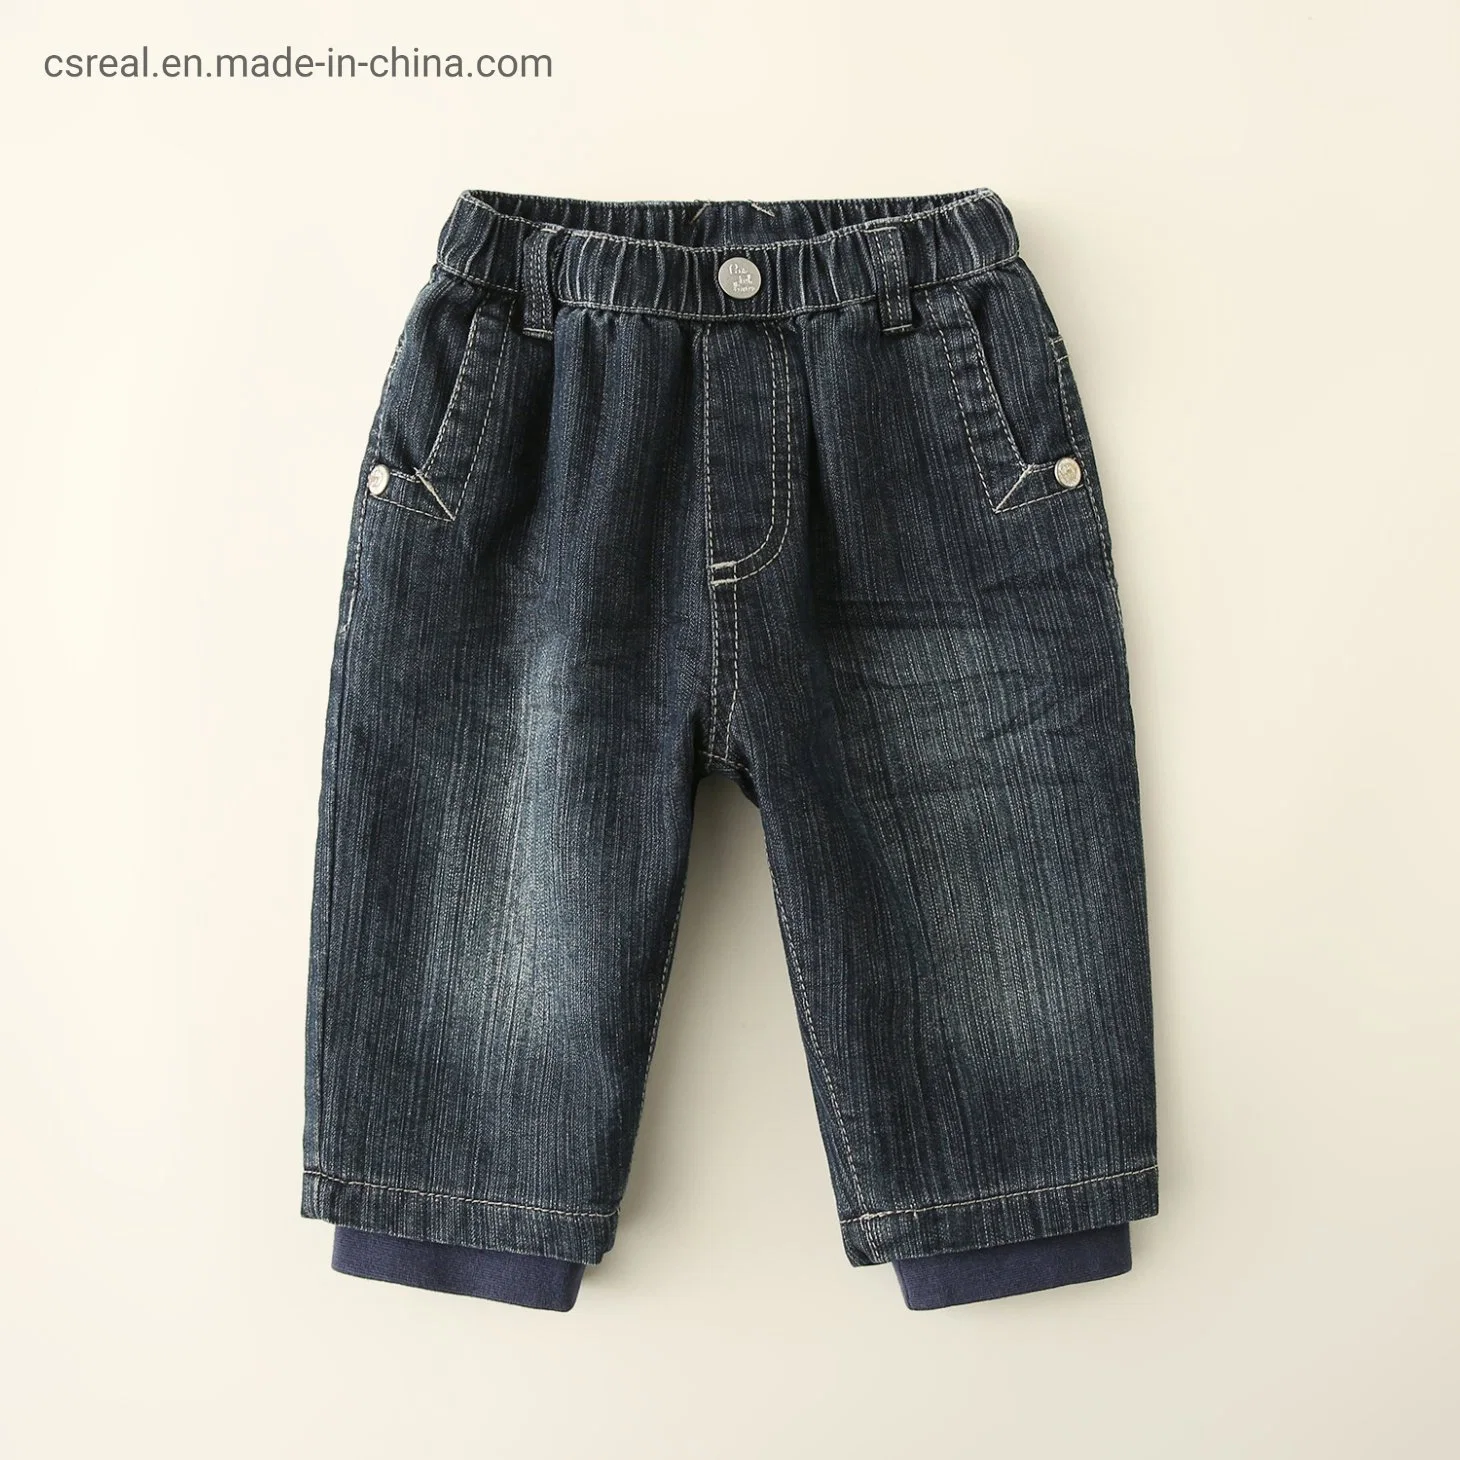 Boy Kids Denim Color Pant Clothes Made of Elastic Waistband and Metal Snap at Pocket with Rib for Hem